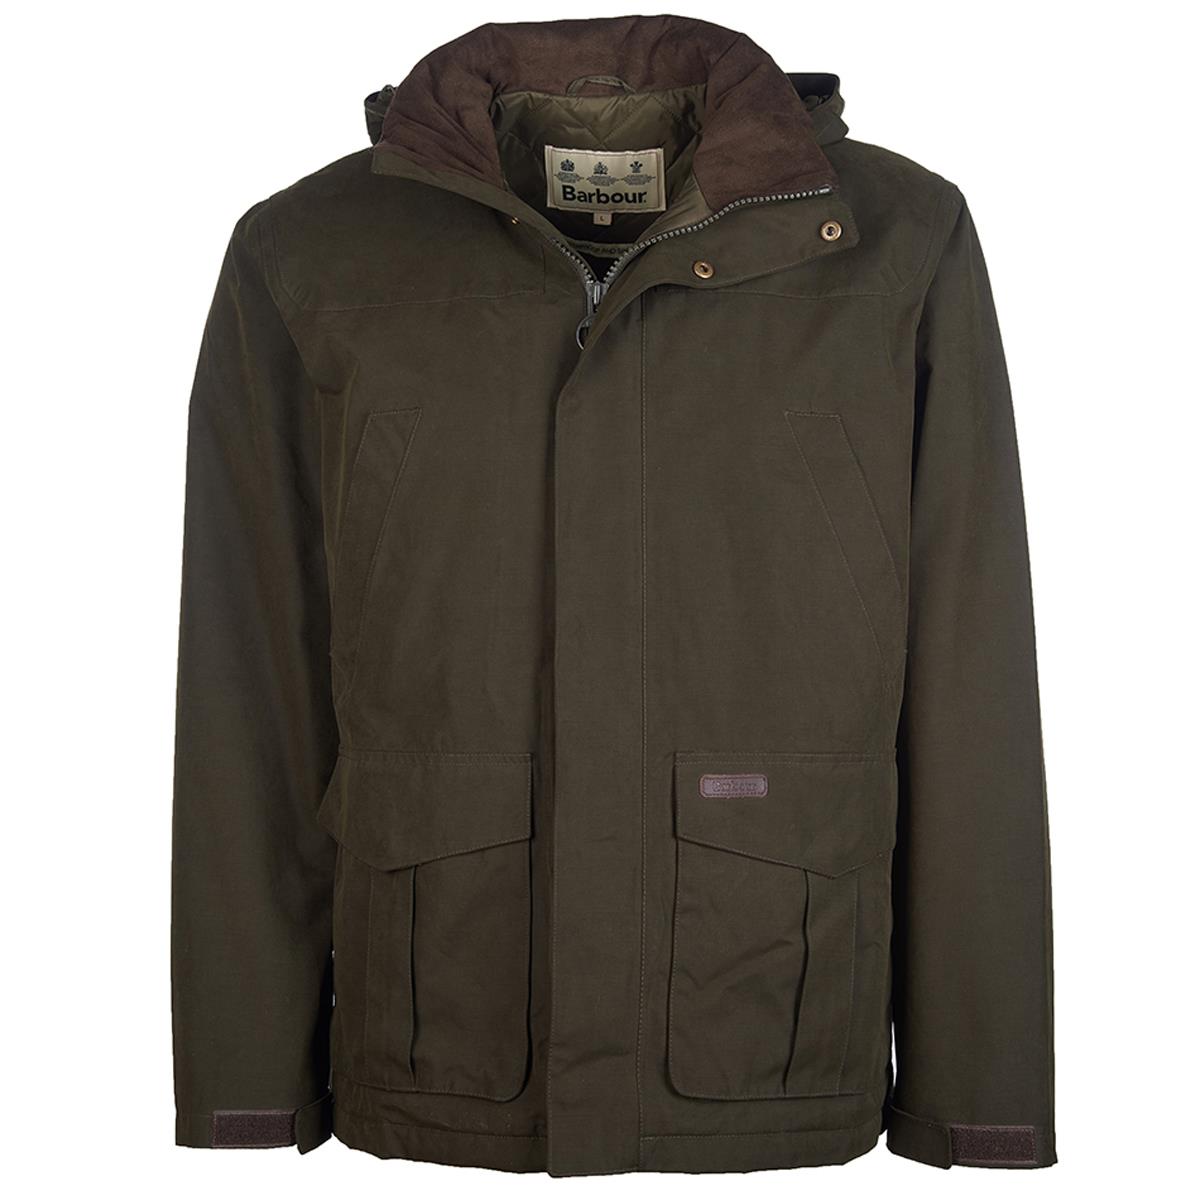 What are the key features of the Barbour Brockstone Jacket?